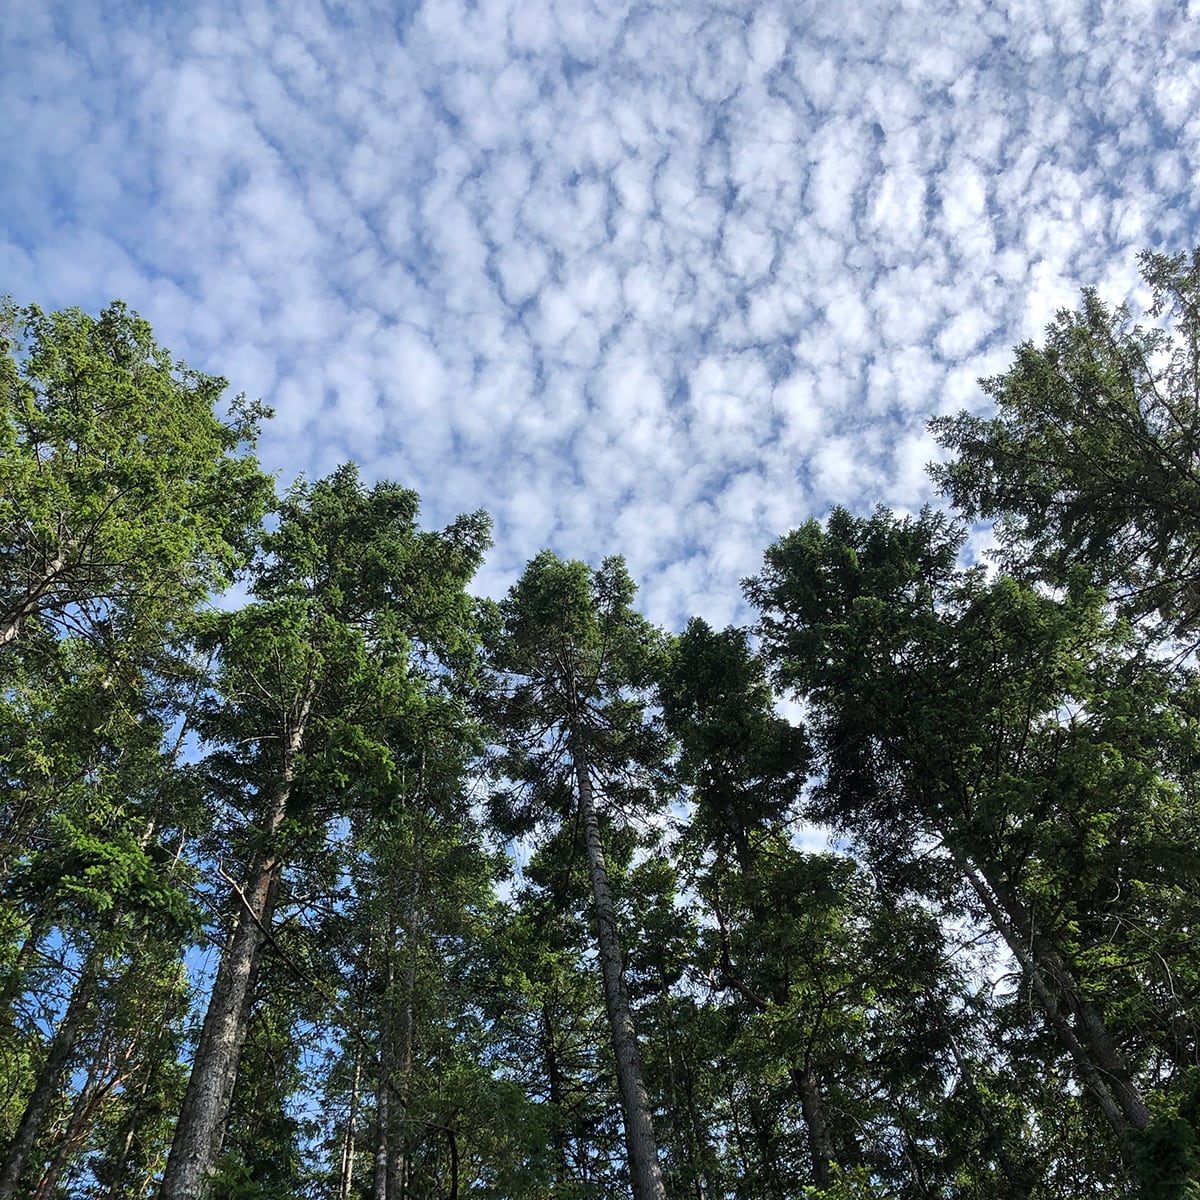 A look at a grove of evergreen trees, viewing upwards towards a blue sky and fluffy clouds